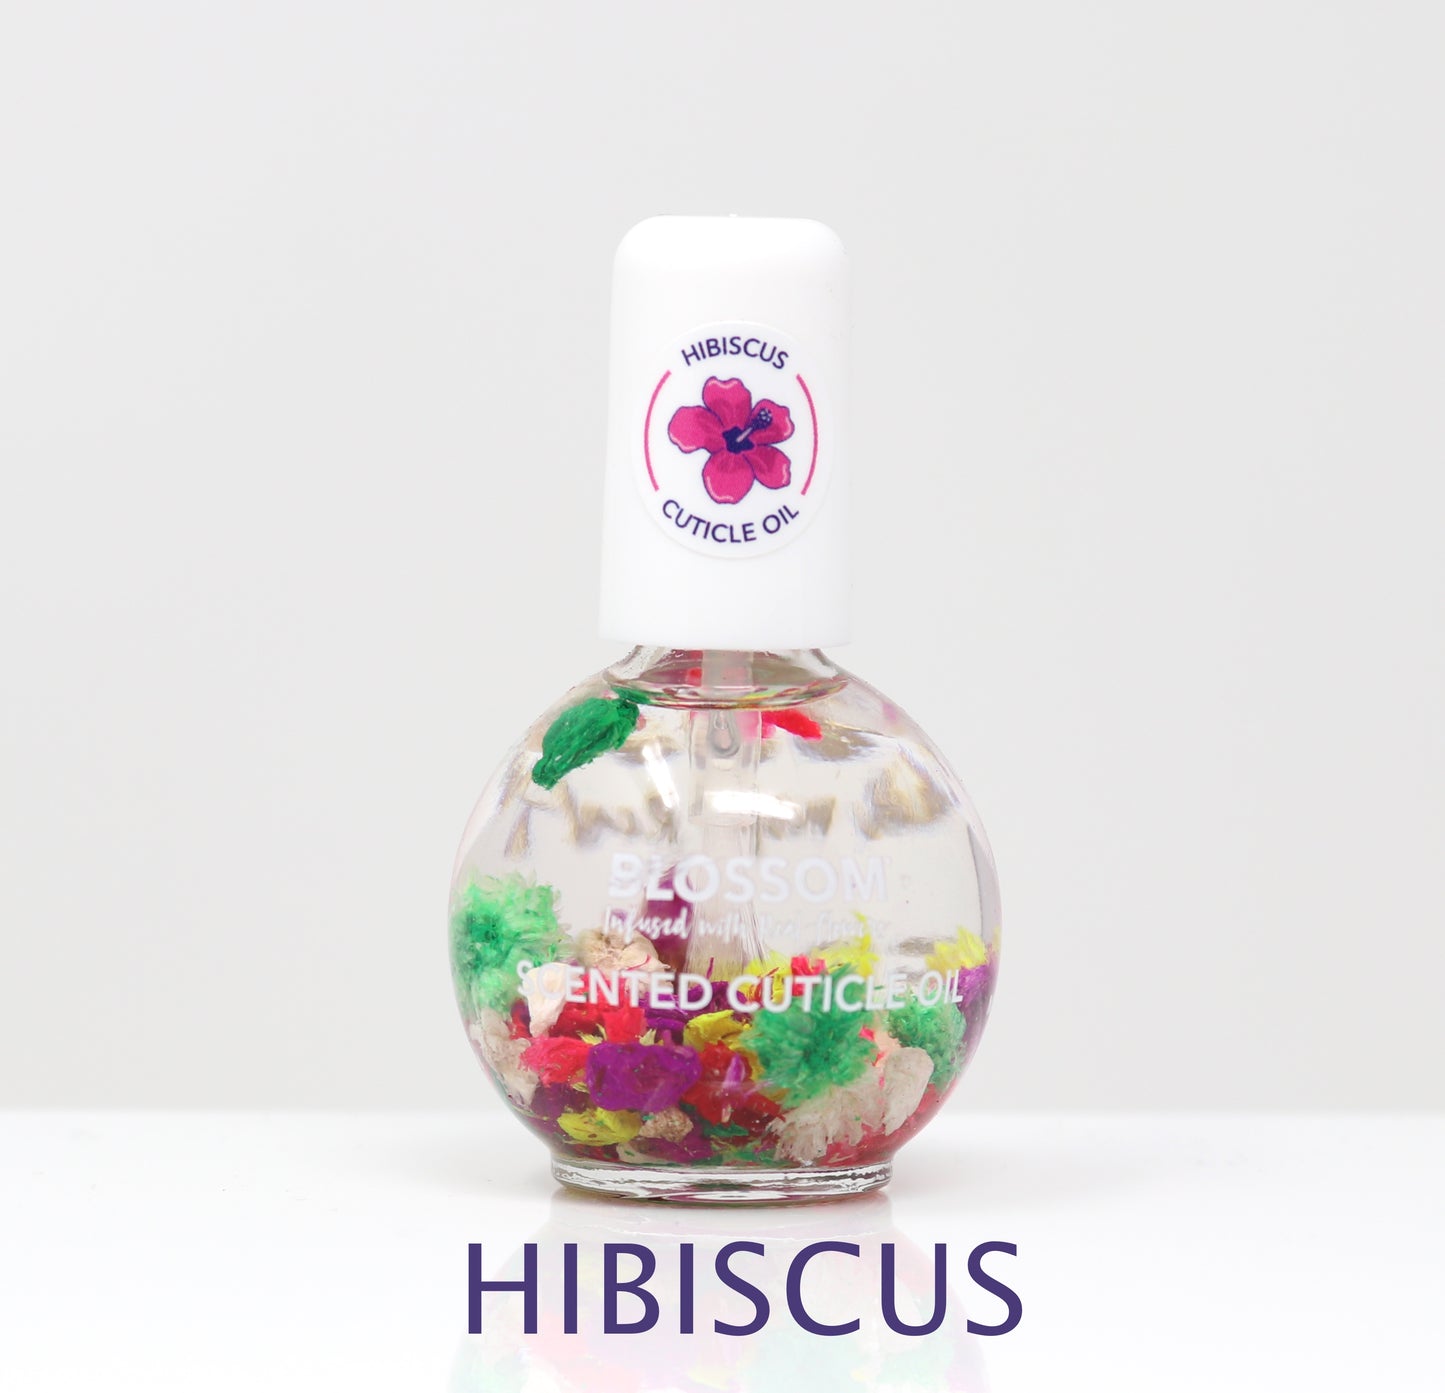 Blossom Cuticle Oil All-Natural Hydrate, Repair Dry Cuticles Flower-Inspired Scents 0.42 1 Pc.